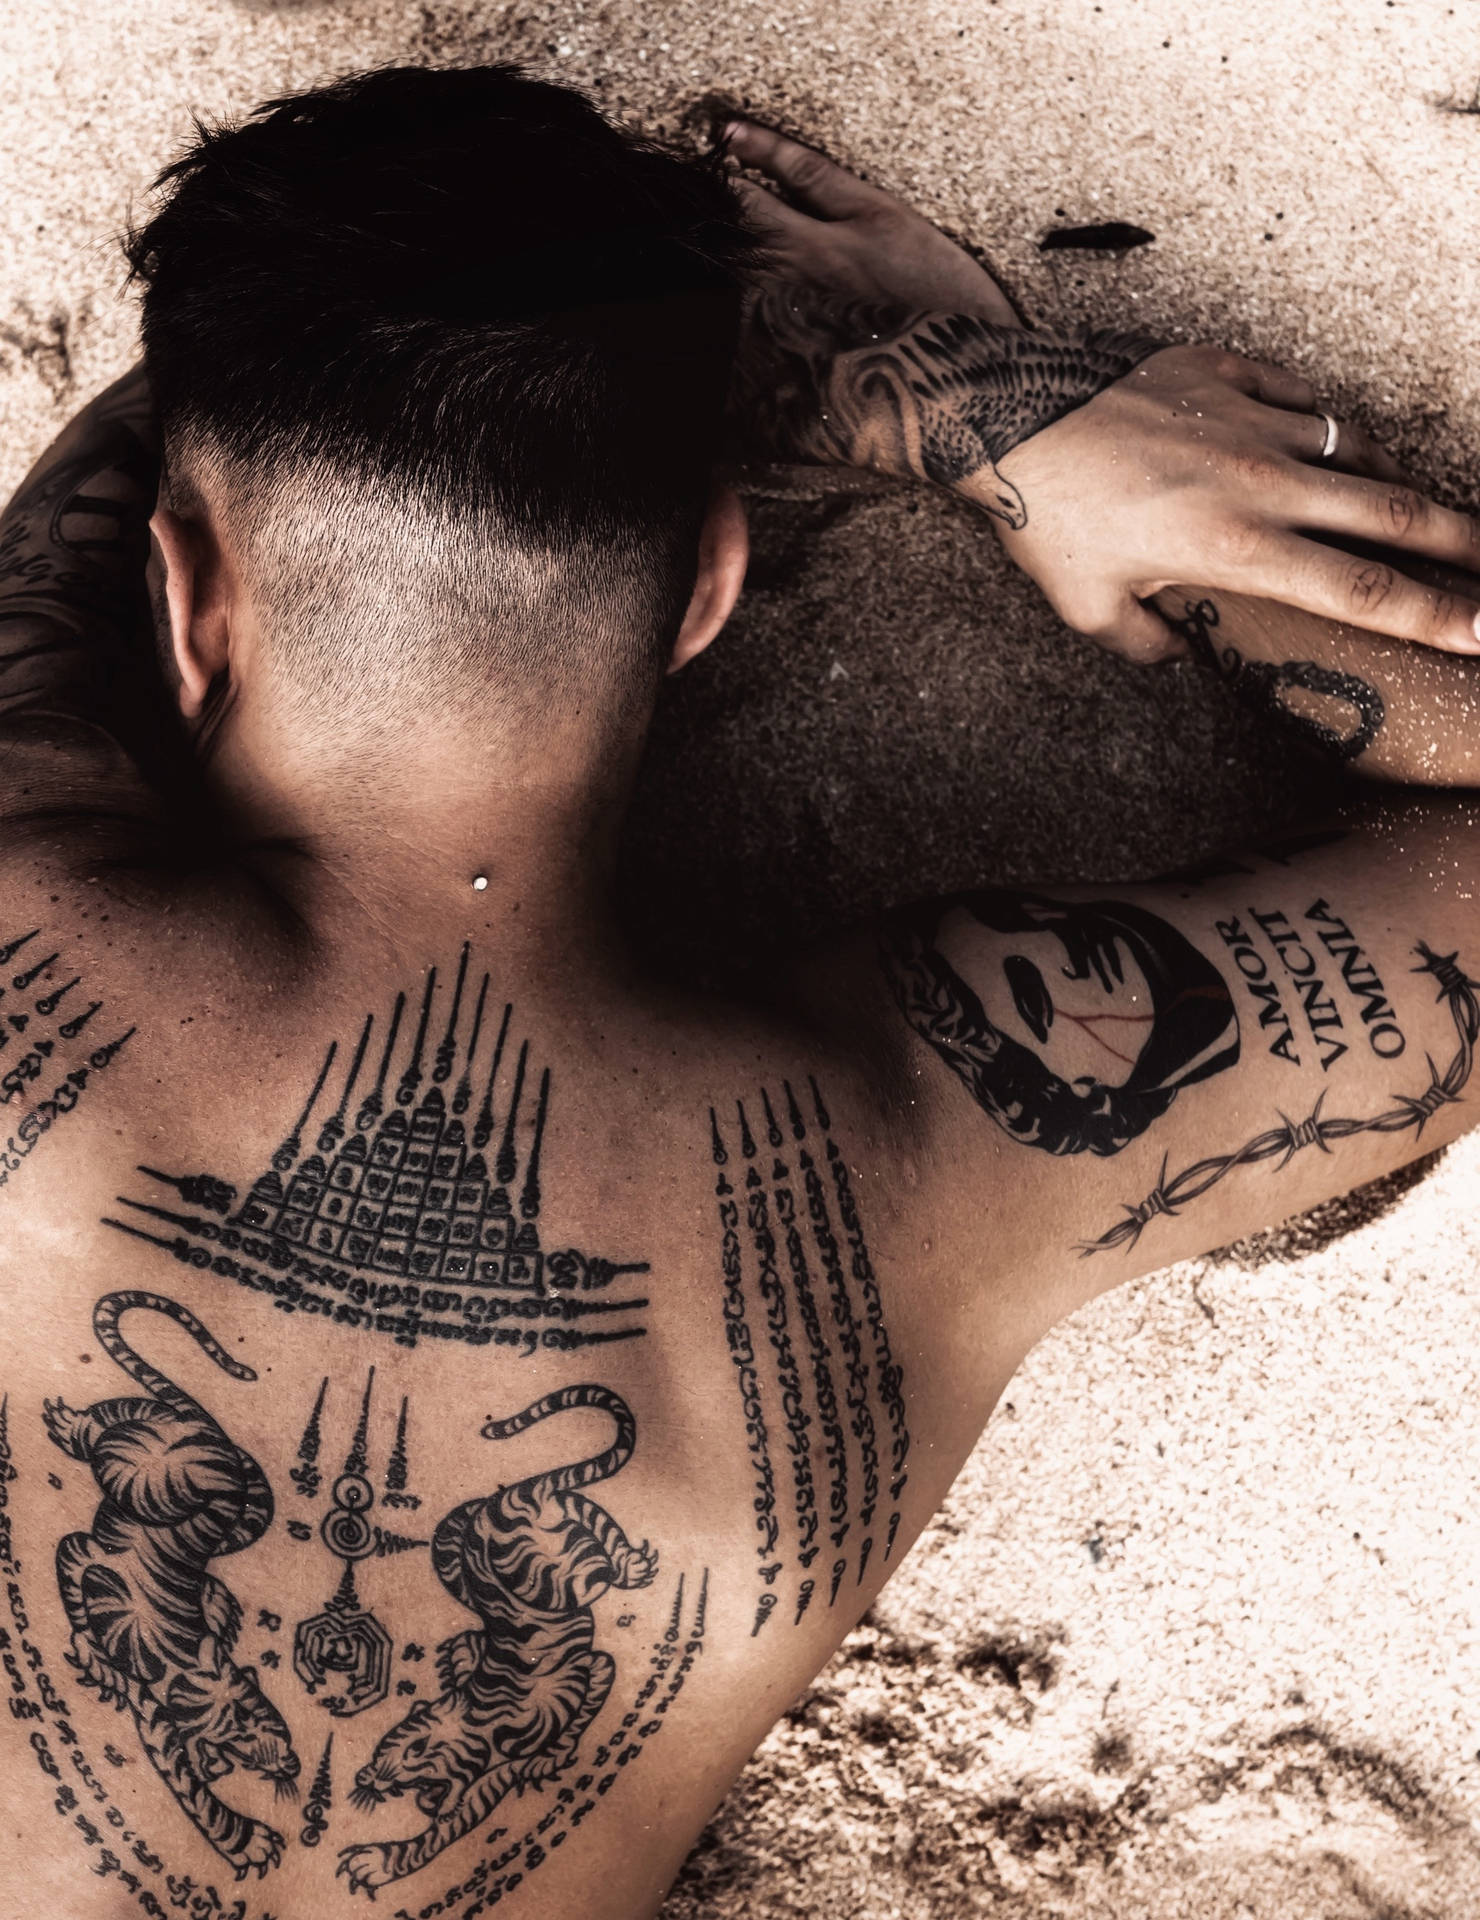 Man With Hd Tattoo On Sand